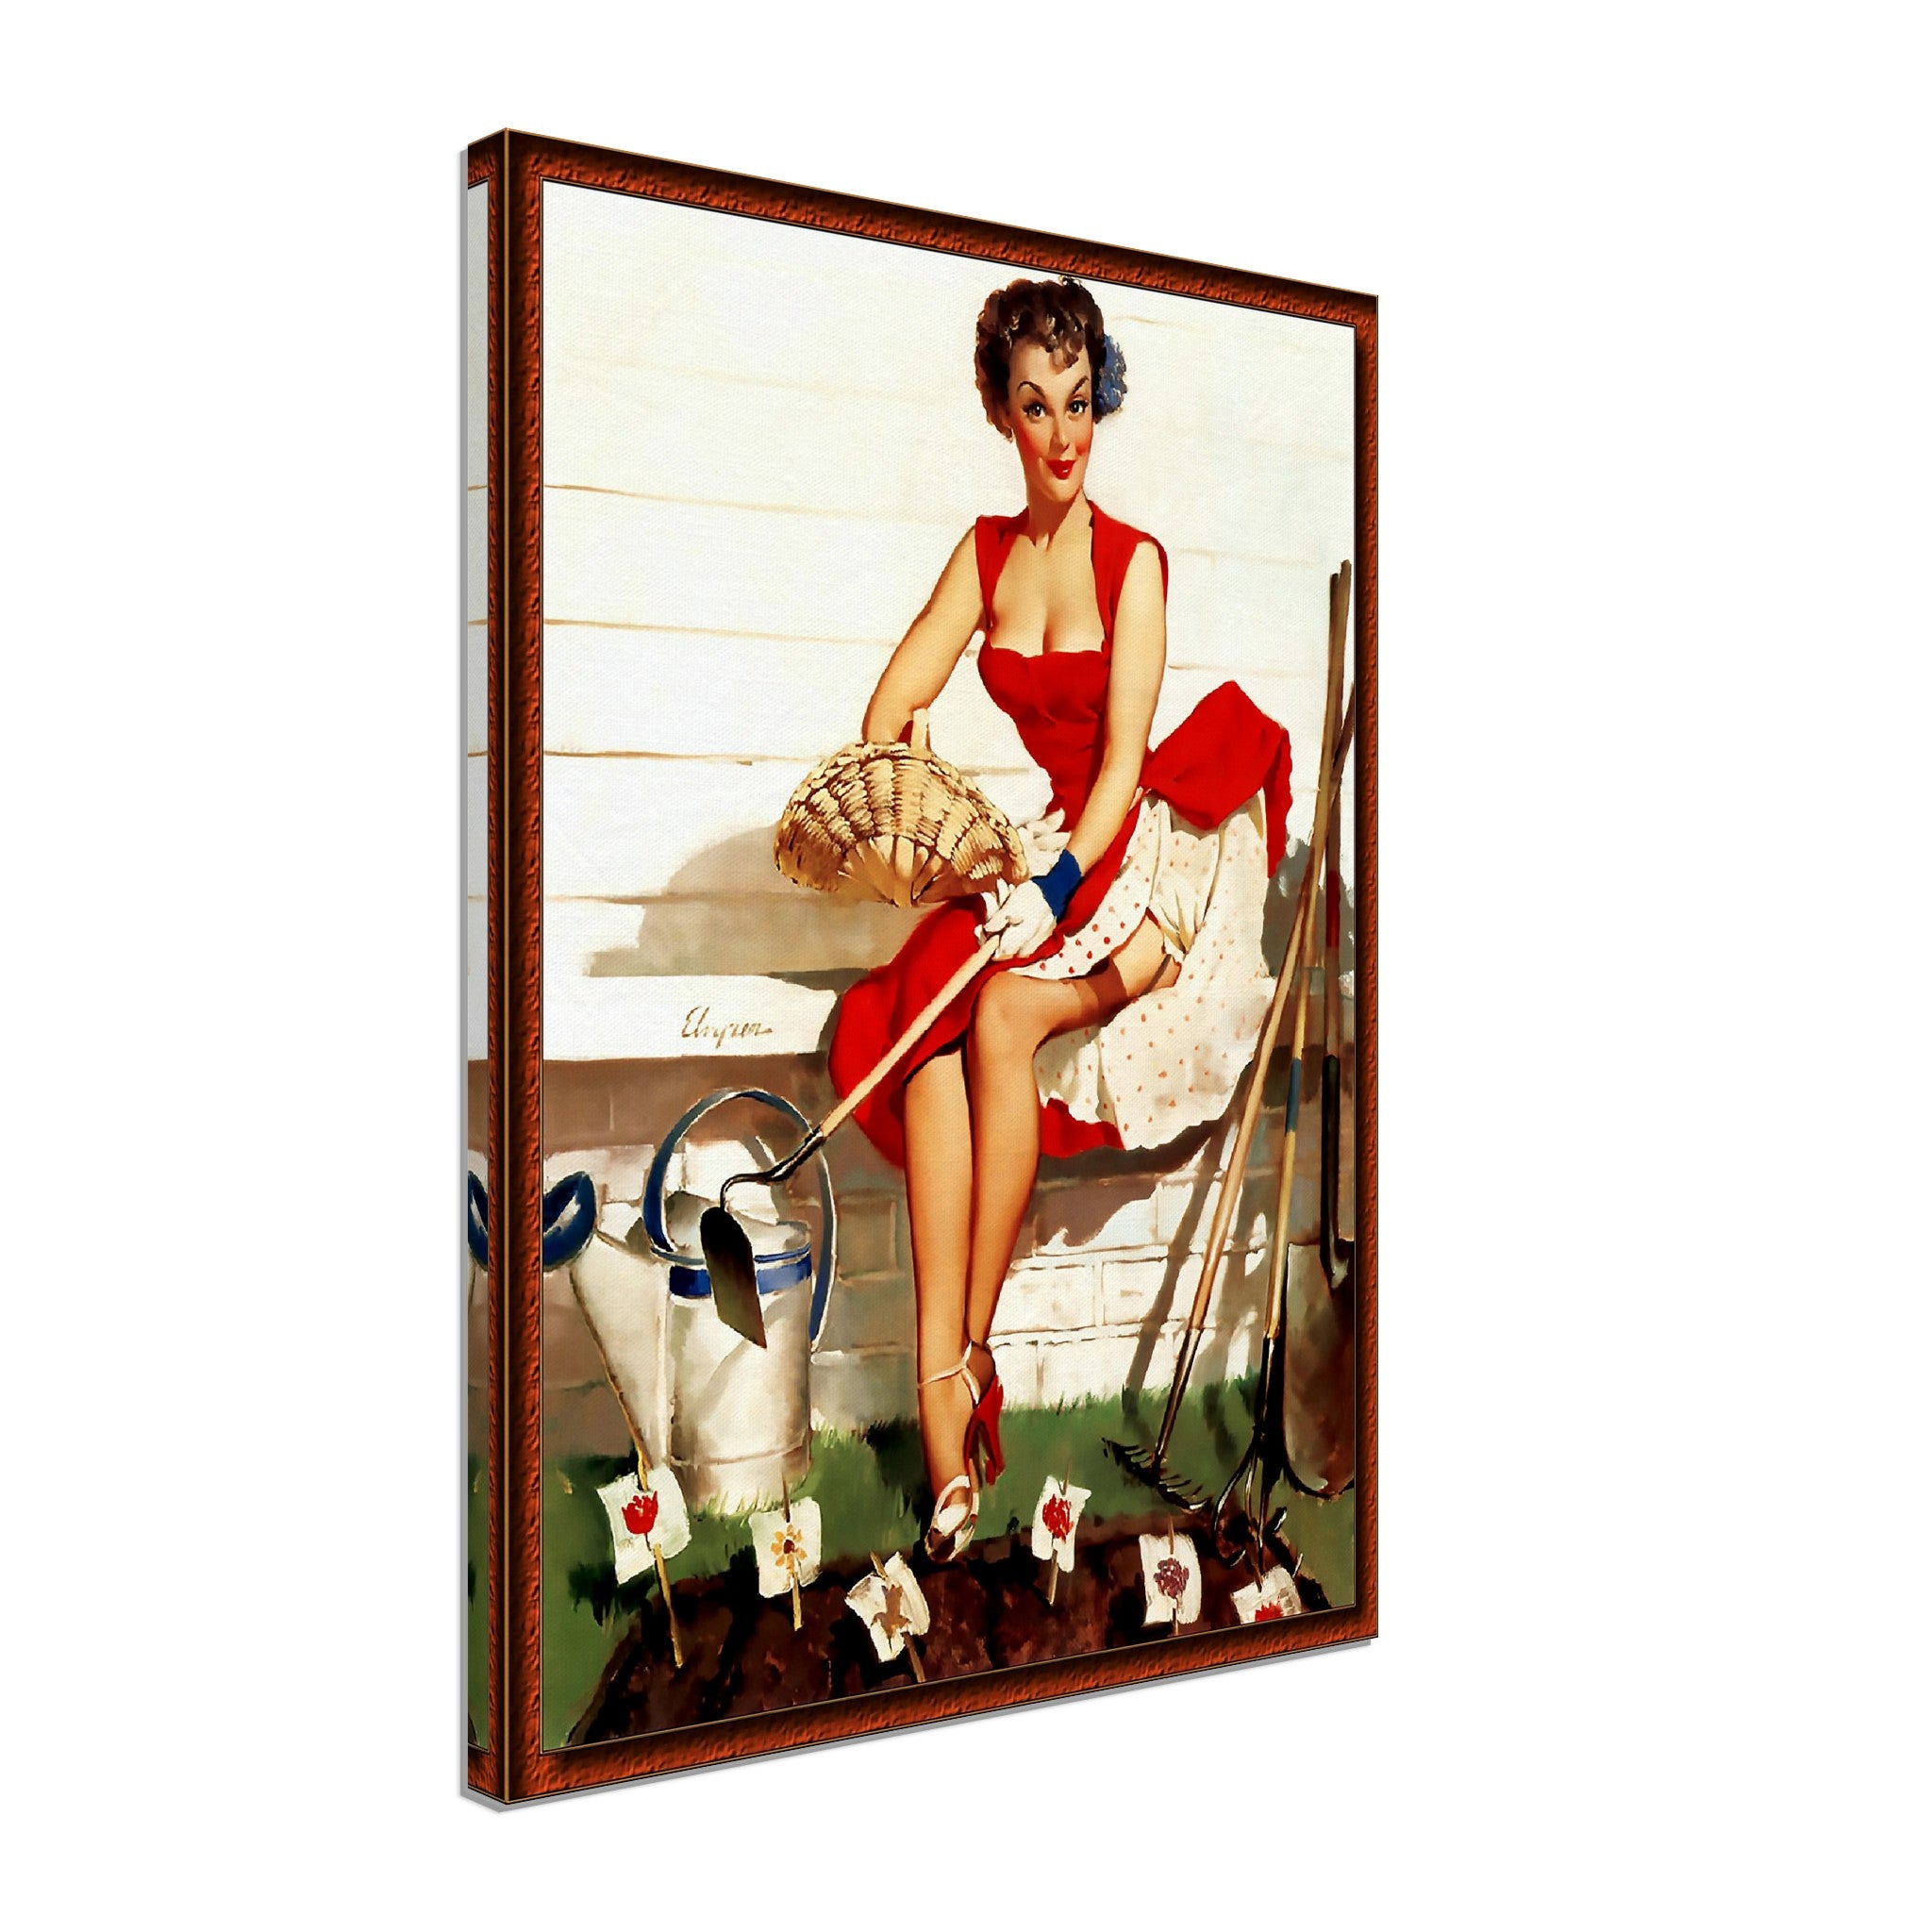 Pin Up Girl Canvas, Gil Elvgren, Gardening With Hoe - Vintage Art - Retro Pin Up Girl Canvas Print - Late 1940'S - 1950'S